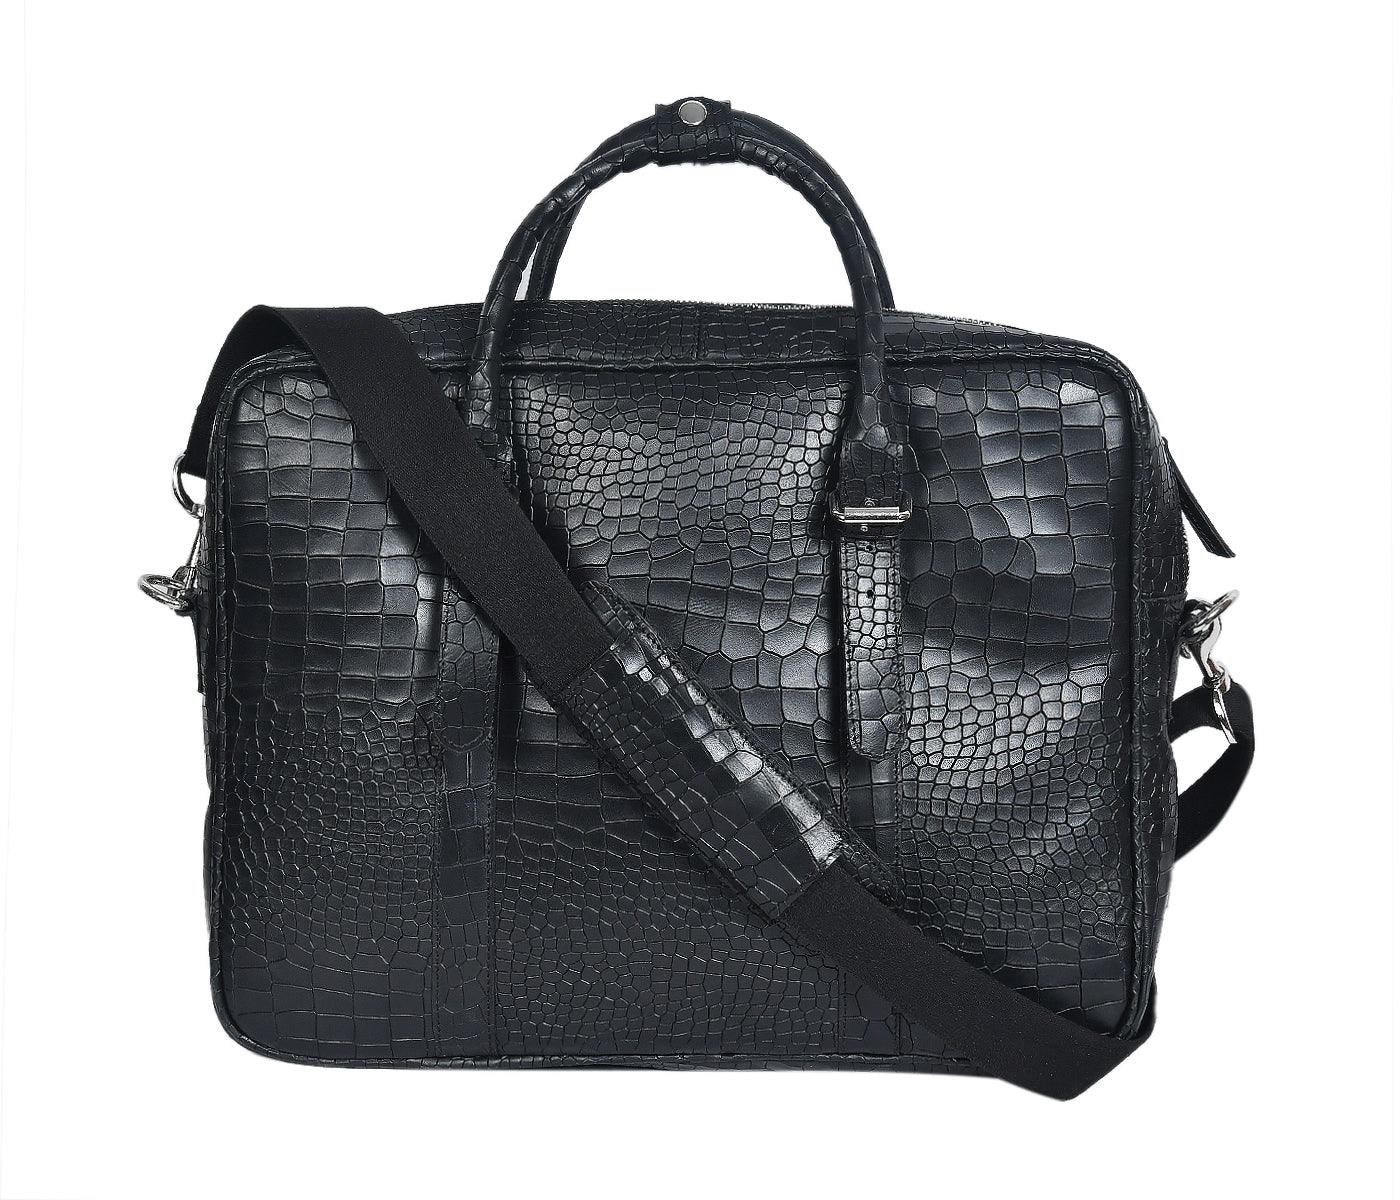 Celtic black color croco texture pure leather laptop bag for office use with holdall and shoulder strap - CELTICINDIA